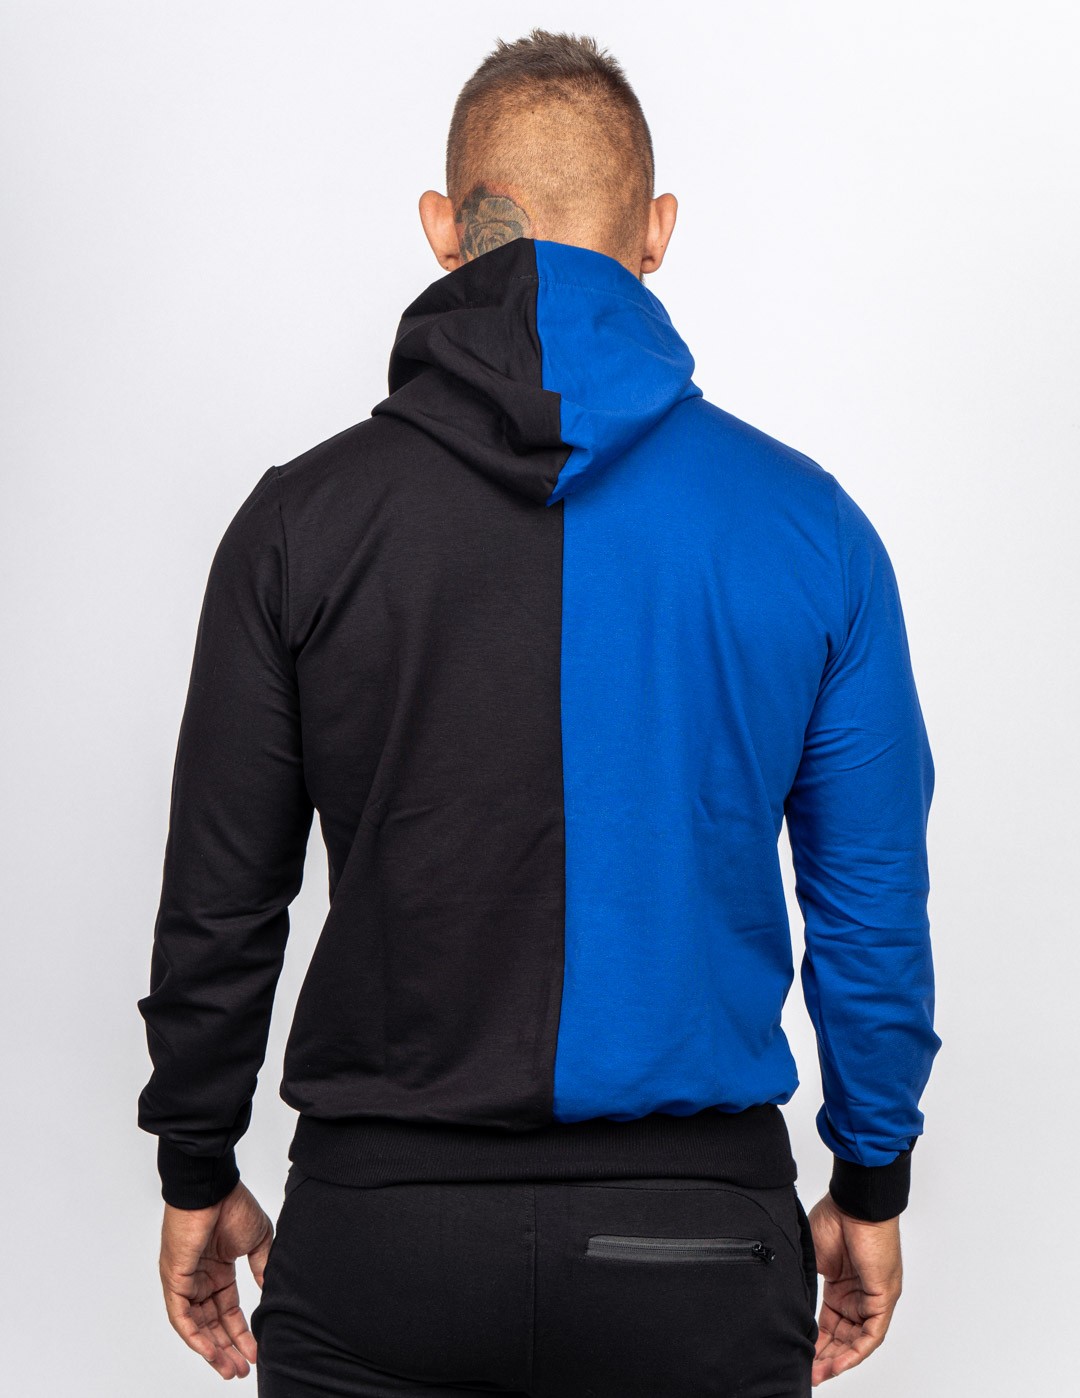 Hoodie DOUBLE FACE BW TRADEMARK Blue/Black